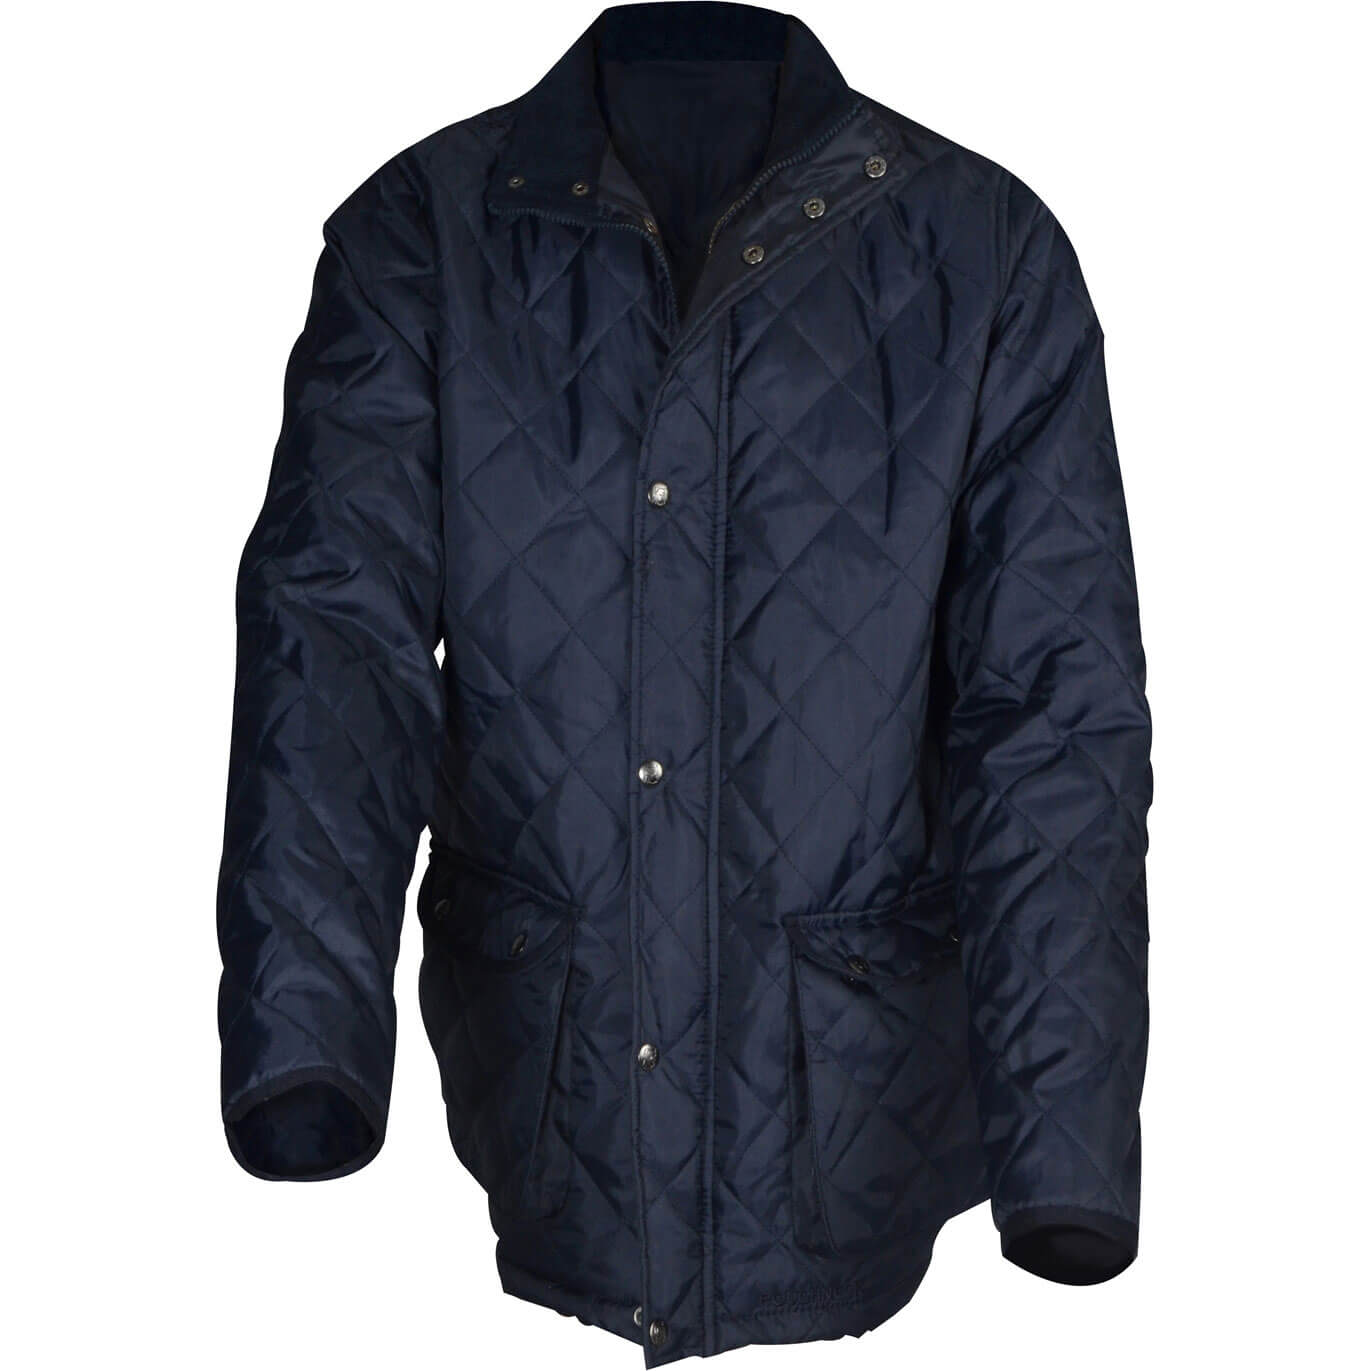 Roughneck Mens Quilted Jacket | Jackets